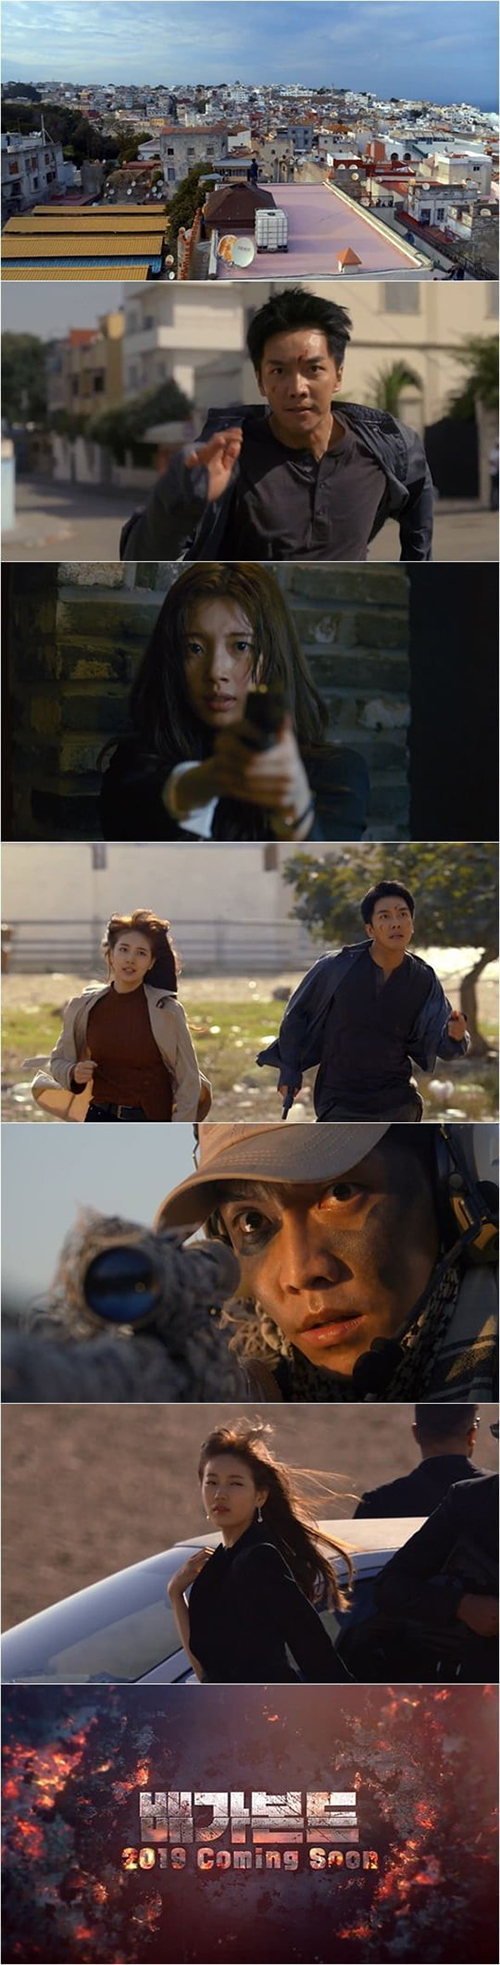 <p>Coming March 5 Broadcast be Lee Seung-gi, Bae Suzy cast of SBS new drama Vagabond, the first Teaser video as public.</p><p>Vagabondis the giant, salaryman chohanji, money incarnation, youre all surrounded., Mr. Soccer, romance Doctor Kim Japanese wisteria to keep recognition coach megaphone, holding a long swimming season and change order writer for the profile to charge.</p><p>Last year 12 31 night Open 2018 SBS acting awardsin 2019 SBS be featured on a new of Teaser video released with Vagabondby Minhang airliner crashed in the accident involved a man concealed the truth found in the huge country to dig and to our drama.</p><p>Especially Bae Suzy and Lee Seung-gi too, brilliant action and the total price to your digestion, because you are transfixed on the police. ‘Vagabond’is the best man Minhang airliner crash in involved in the country to dig and to dam drama broadcast from about 250 billion won production costs of the commitment, Lee Seung-gi and Bae Suzy have appeared to start as any.</p><p>Last 6 month from pre-production on one original drama, Come 5 November, the first broadcast will be, and the Teaser for this netizens are already excited Japanese wisteria of the reaction and the.</p><p>Photo | SBS offers</p>